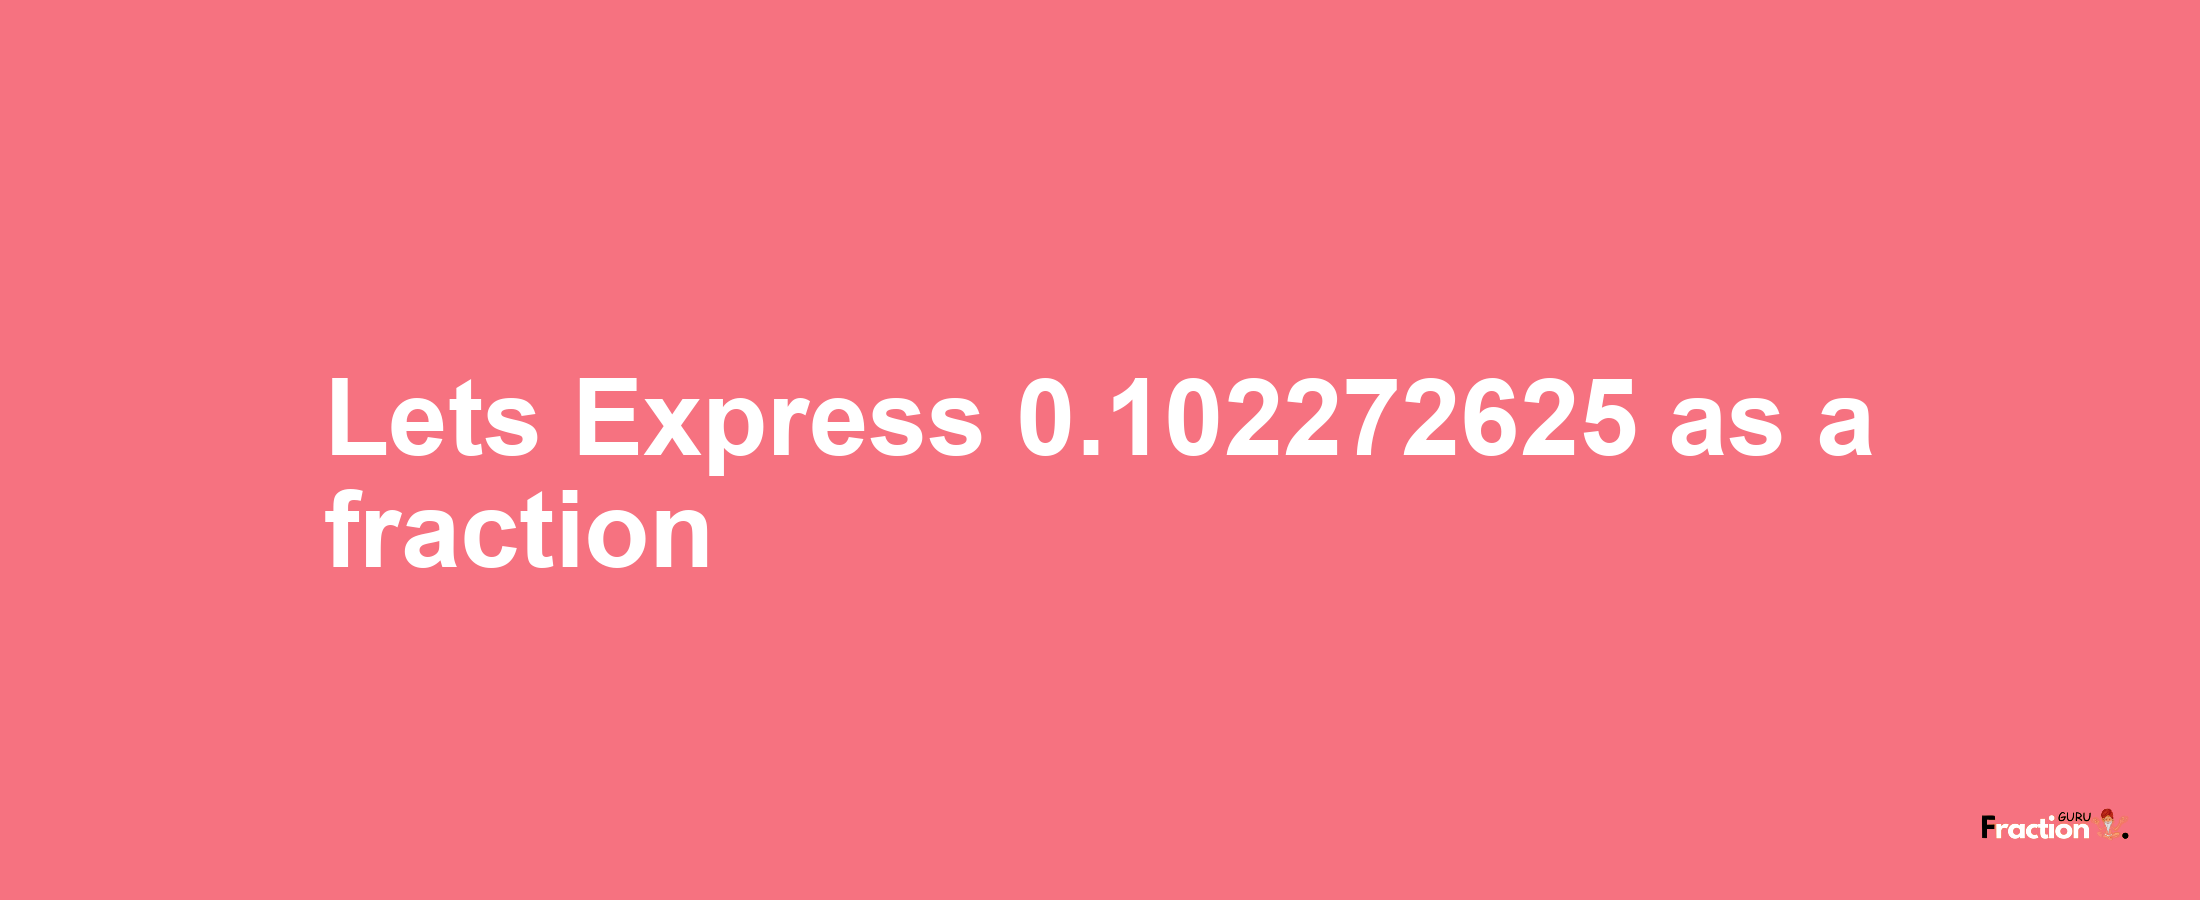 Lets Express 0.102272625 as afraction